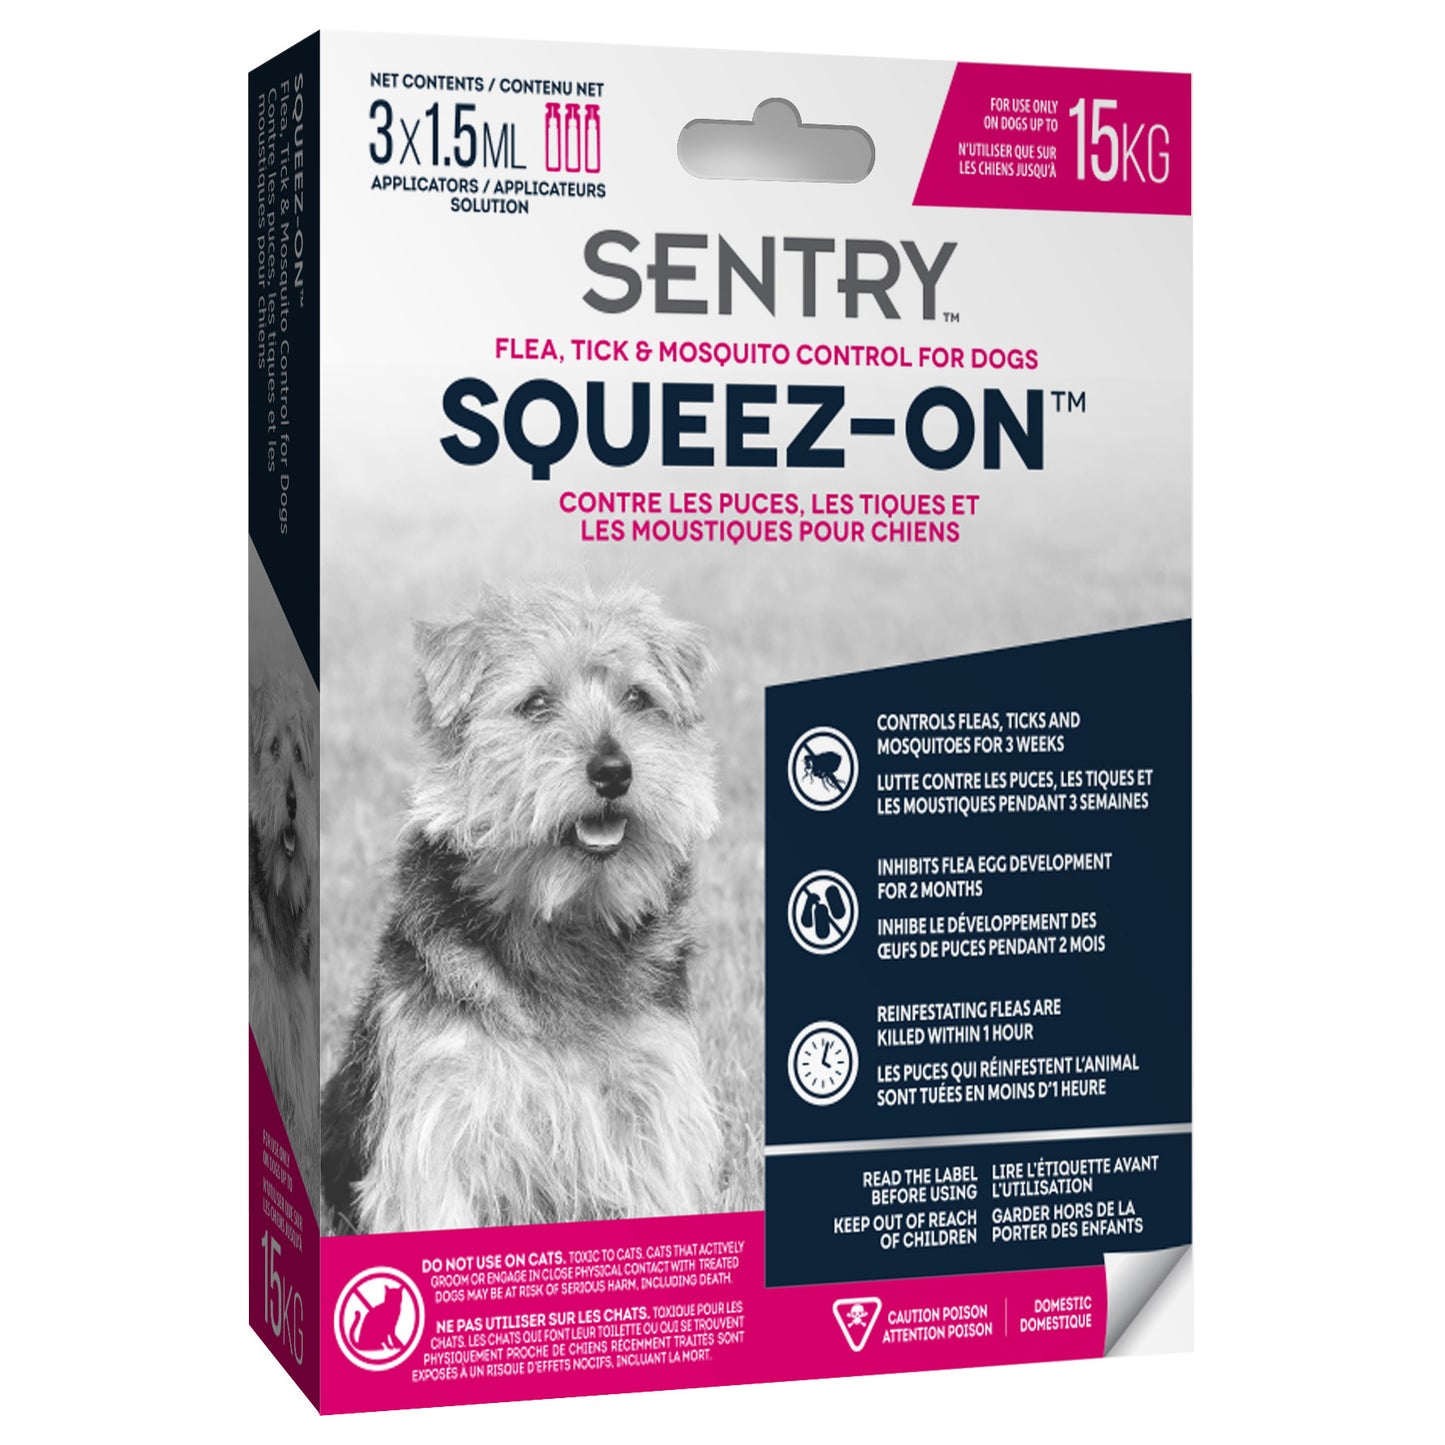 Sentry® Squeez-On™ Flea, Tick & Mosquito Control for Dogs - Critter Country Supply Ltd.